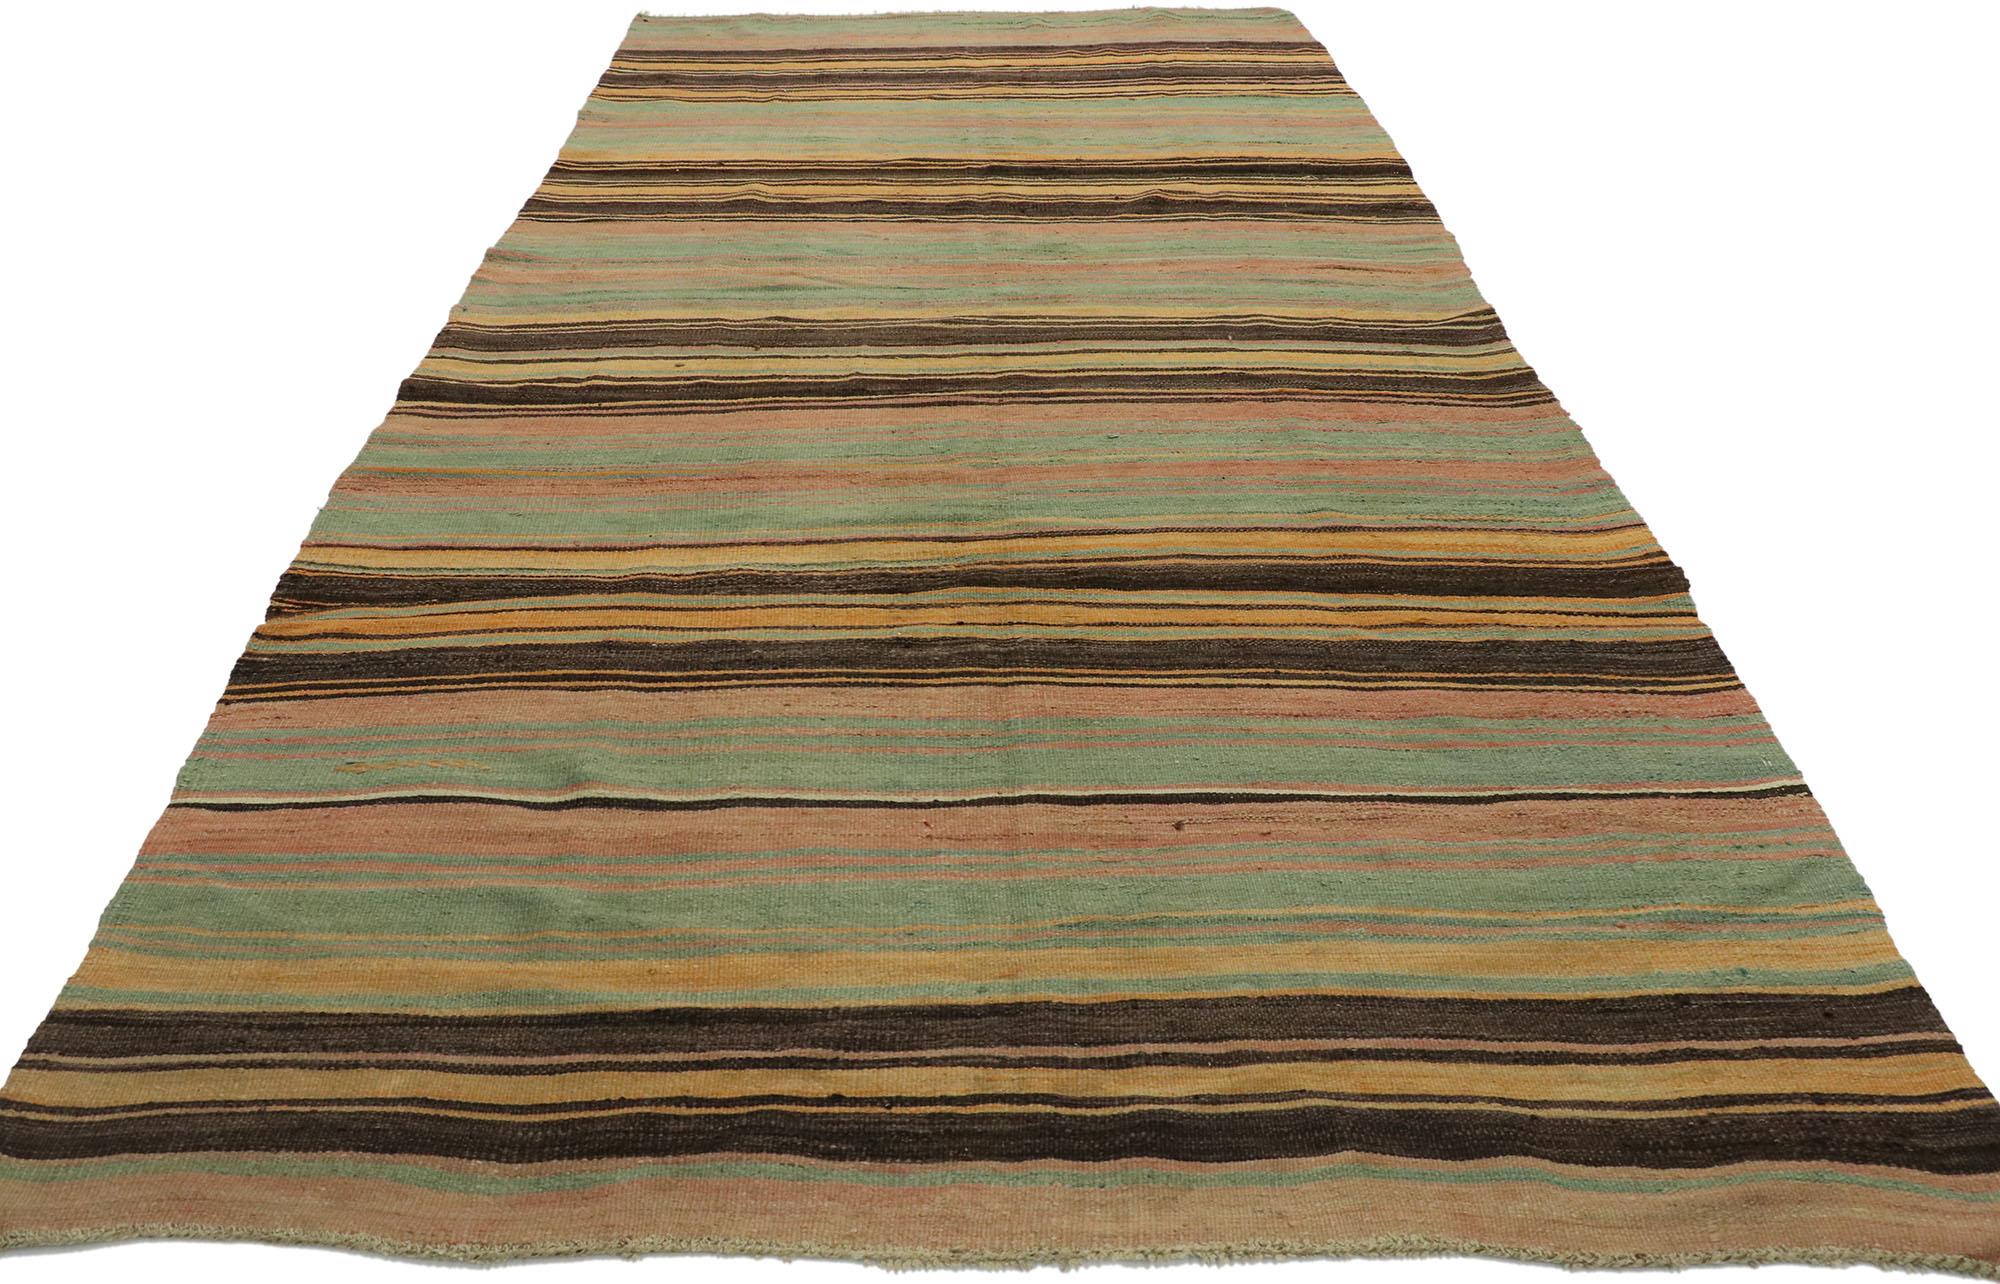 Hand-Woven Vintage Turkish Striped Kilim Rug with Modern Cabin Style